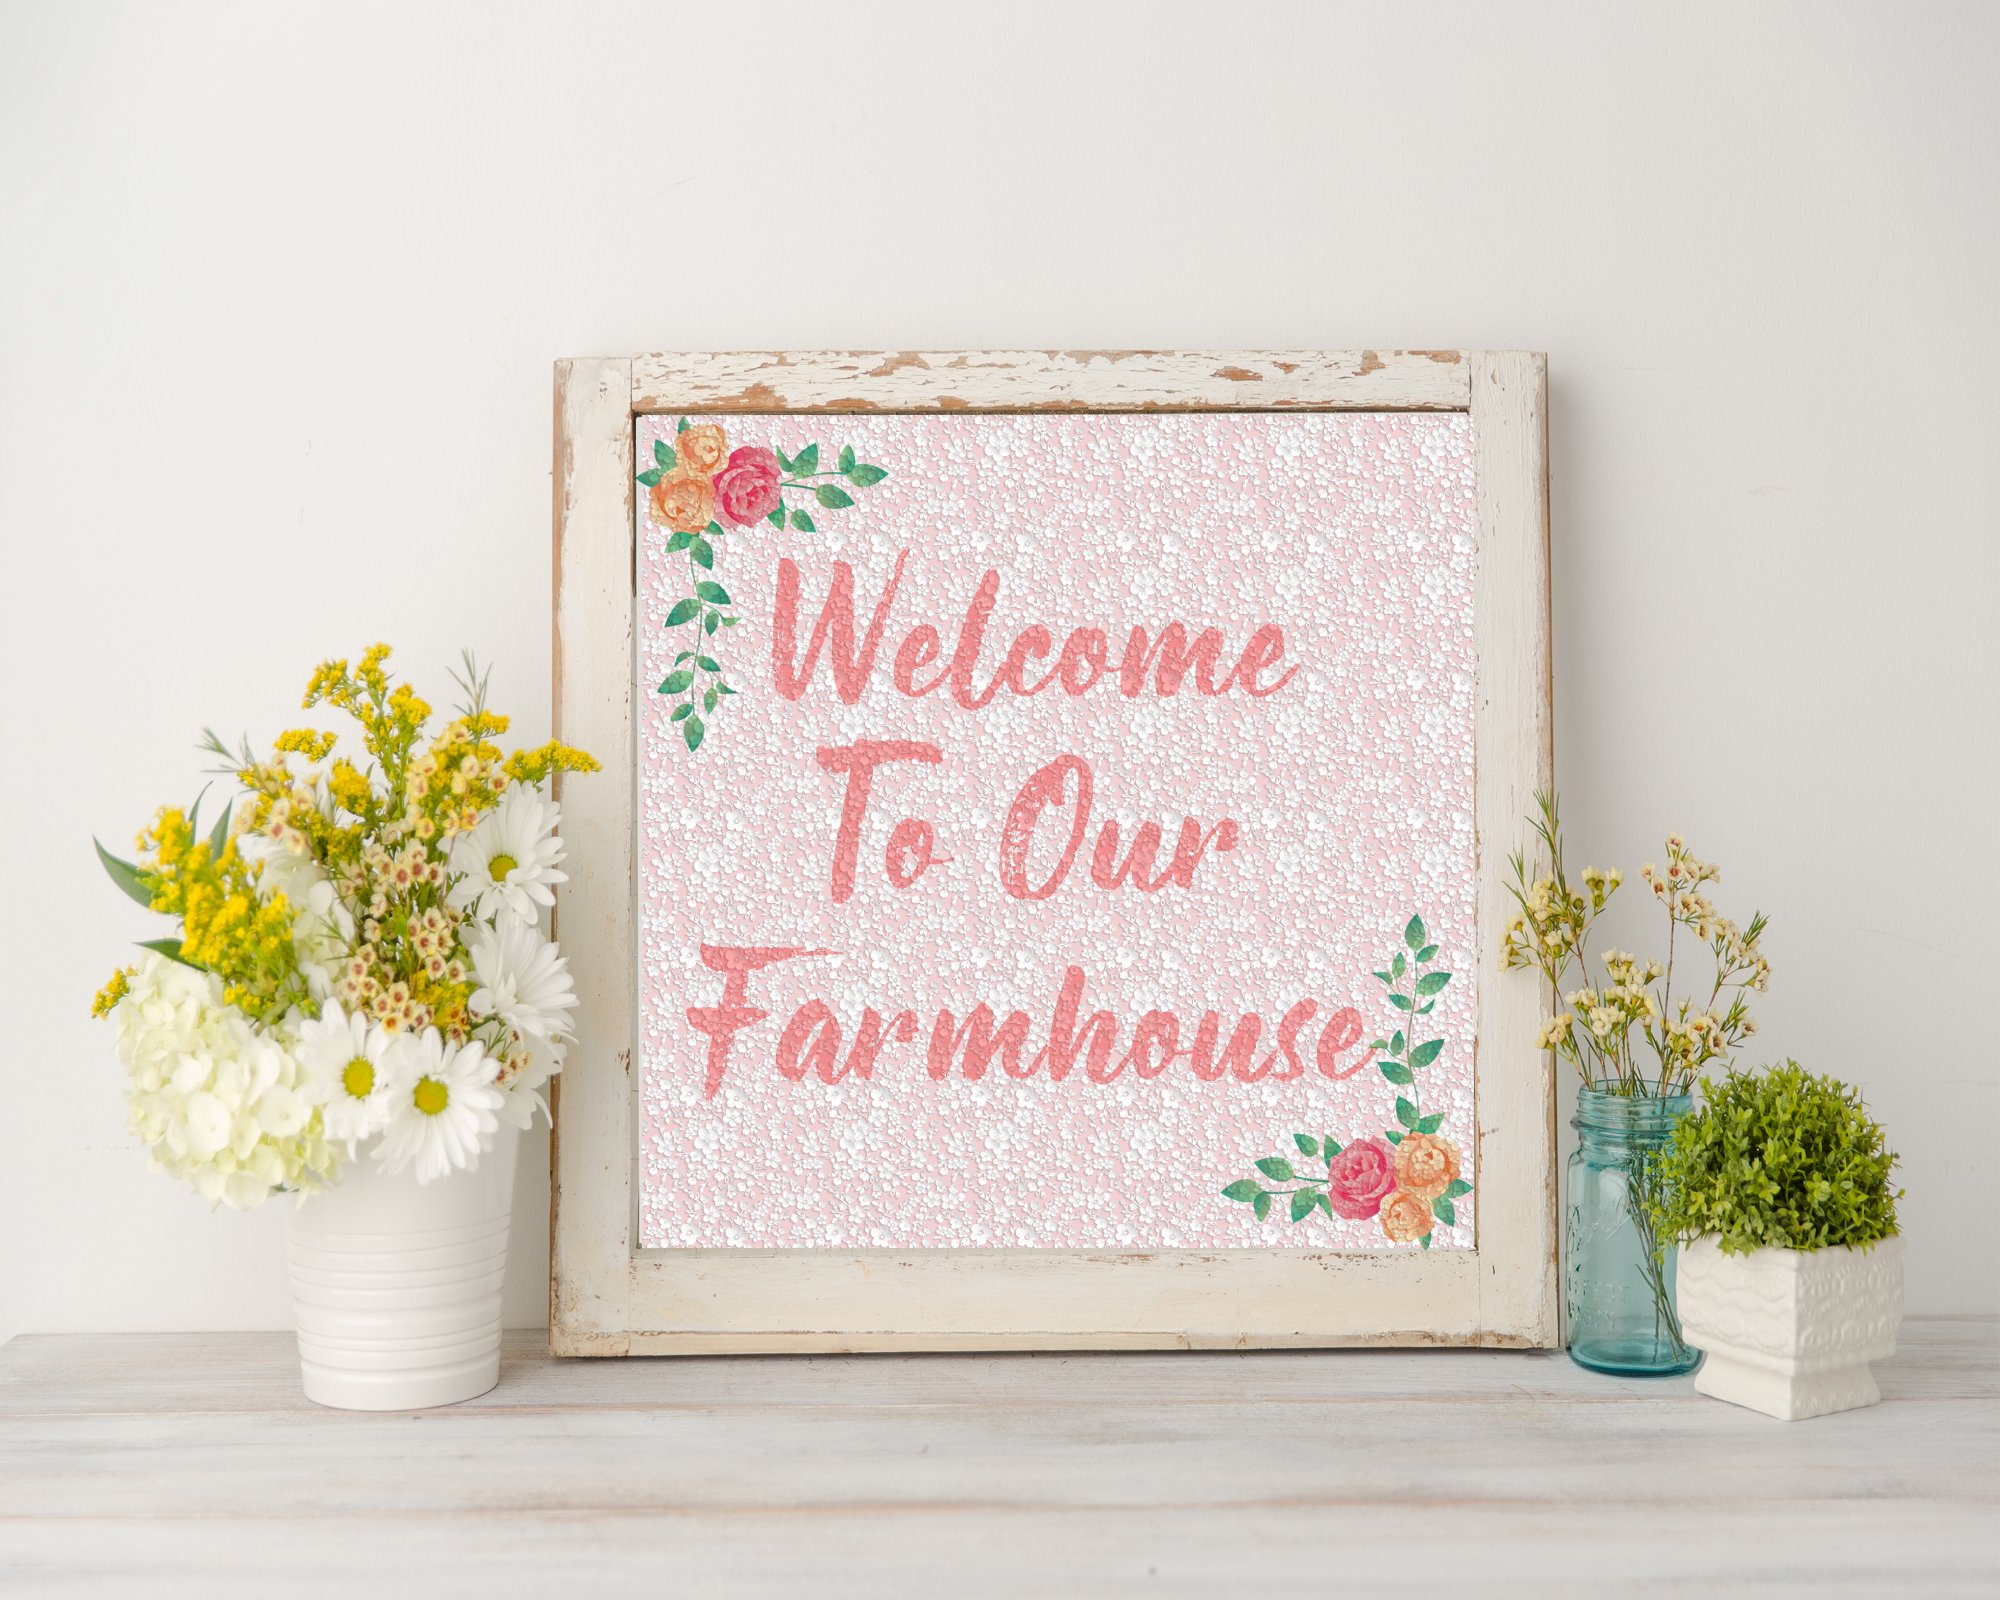 Welcome to our Farmhouse.